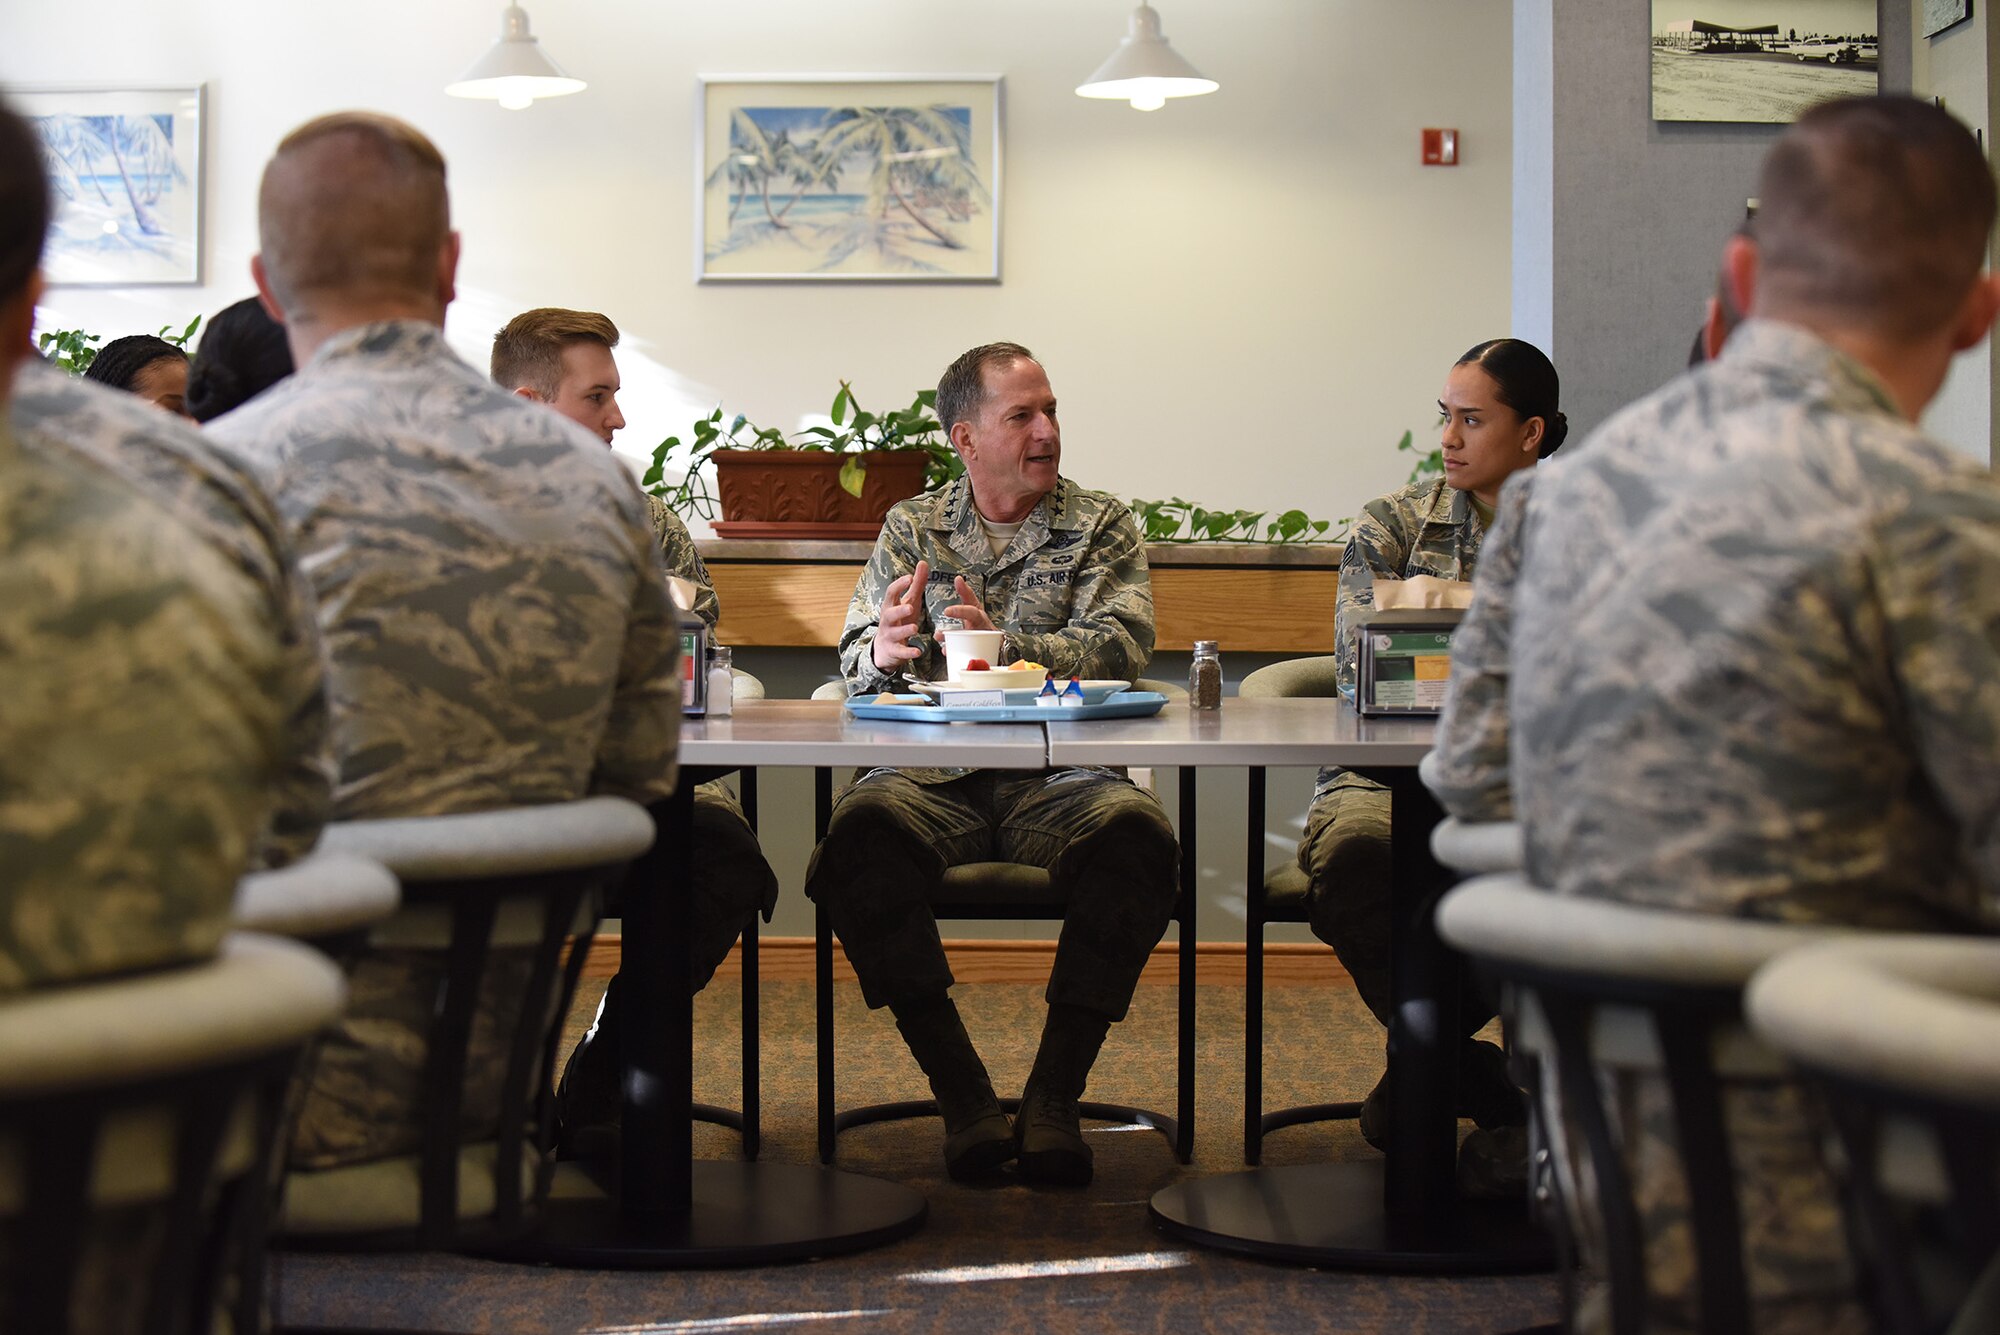 Gen. David L. Goldfein, Air Force Chief of Staff, speaks with Airmen during a breakfast at Breakers Dining Facility, Jan. 30, 2017, Vandenberg Air Force Base, Calif. (U.S. Air Force photo by Senior Airman Robert J. Volio/Released)